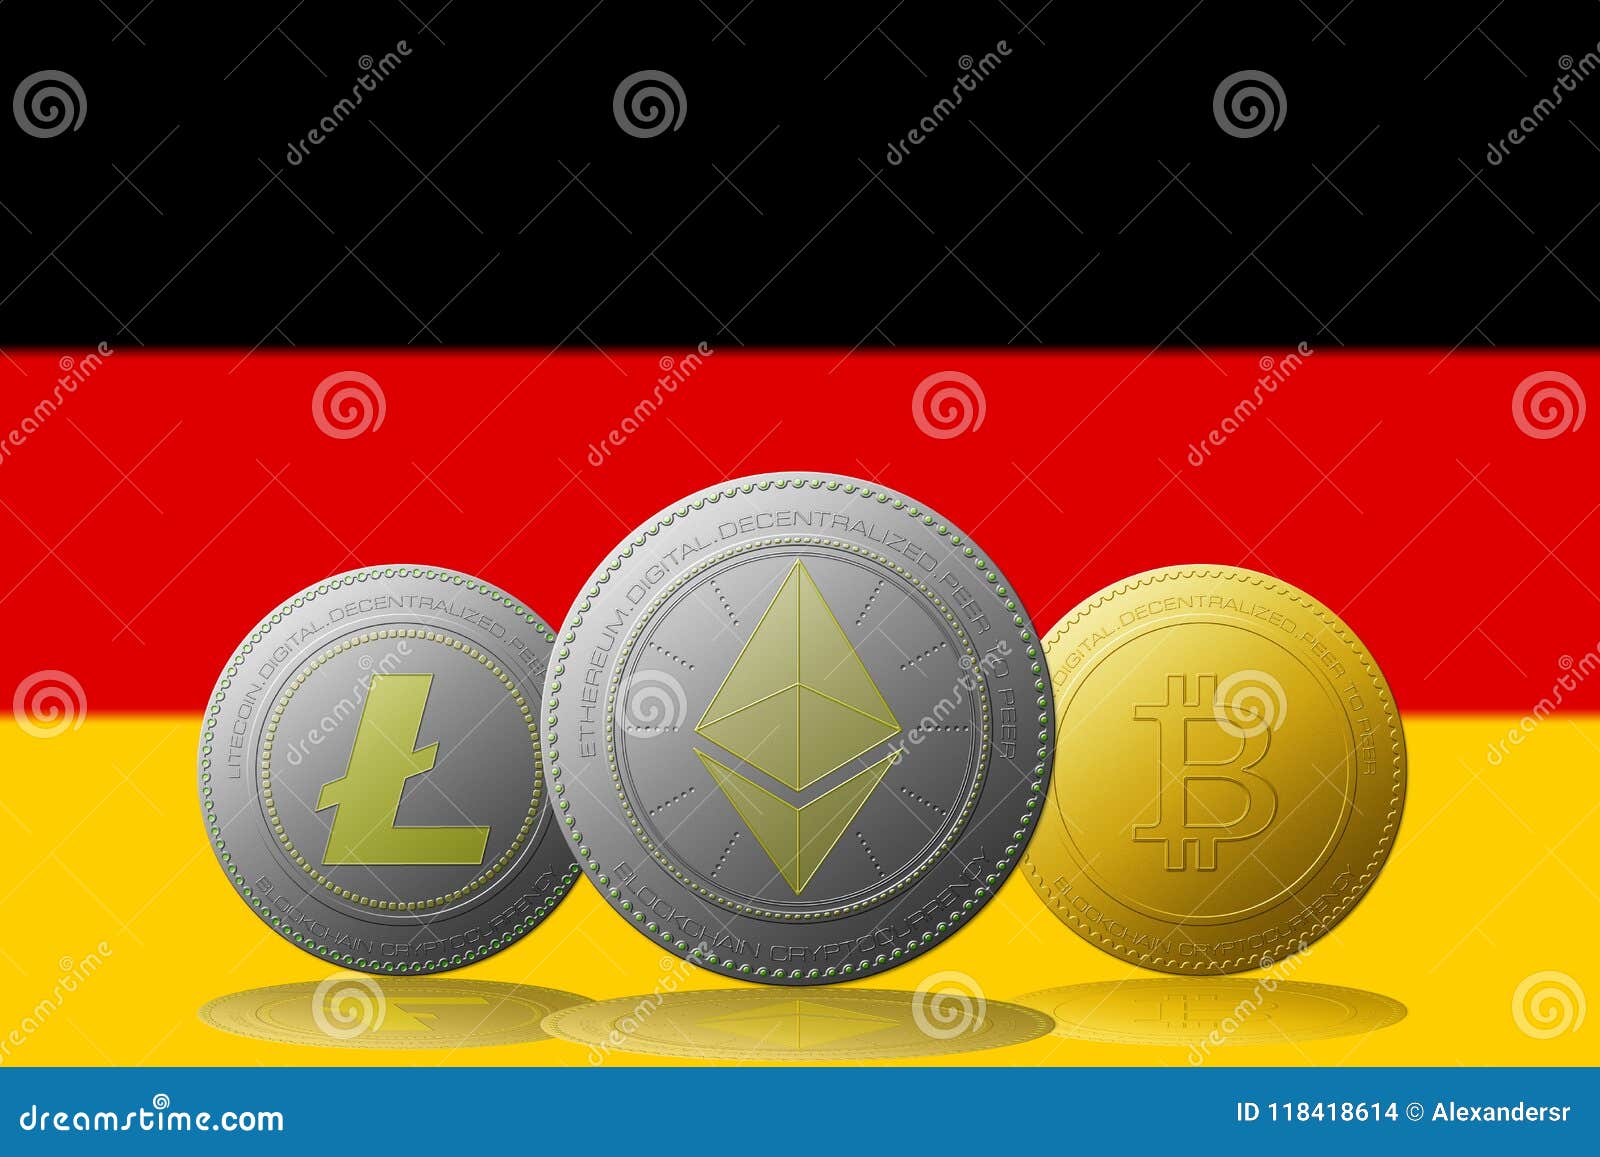 3d Illustration Three Cryptocurrencies Bitcoin Ethereum And Litecoin - 